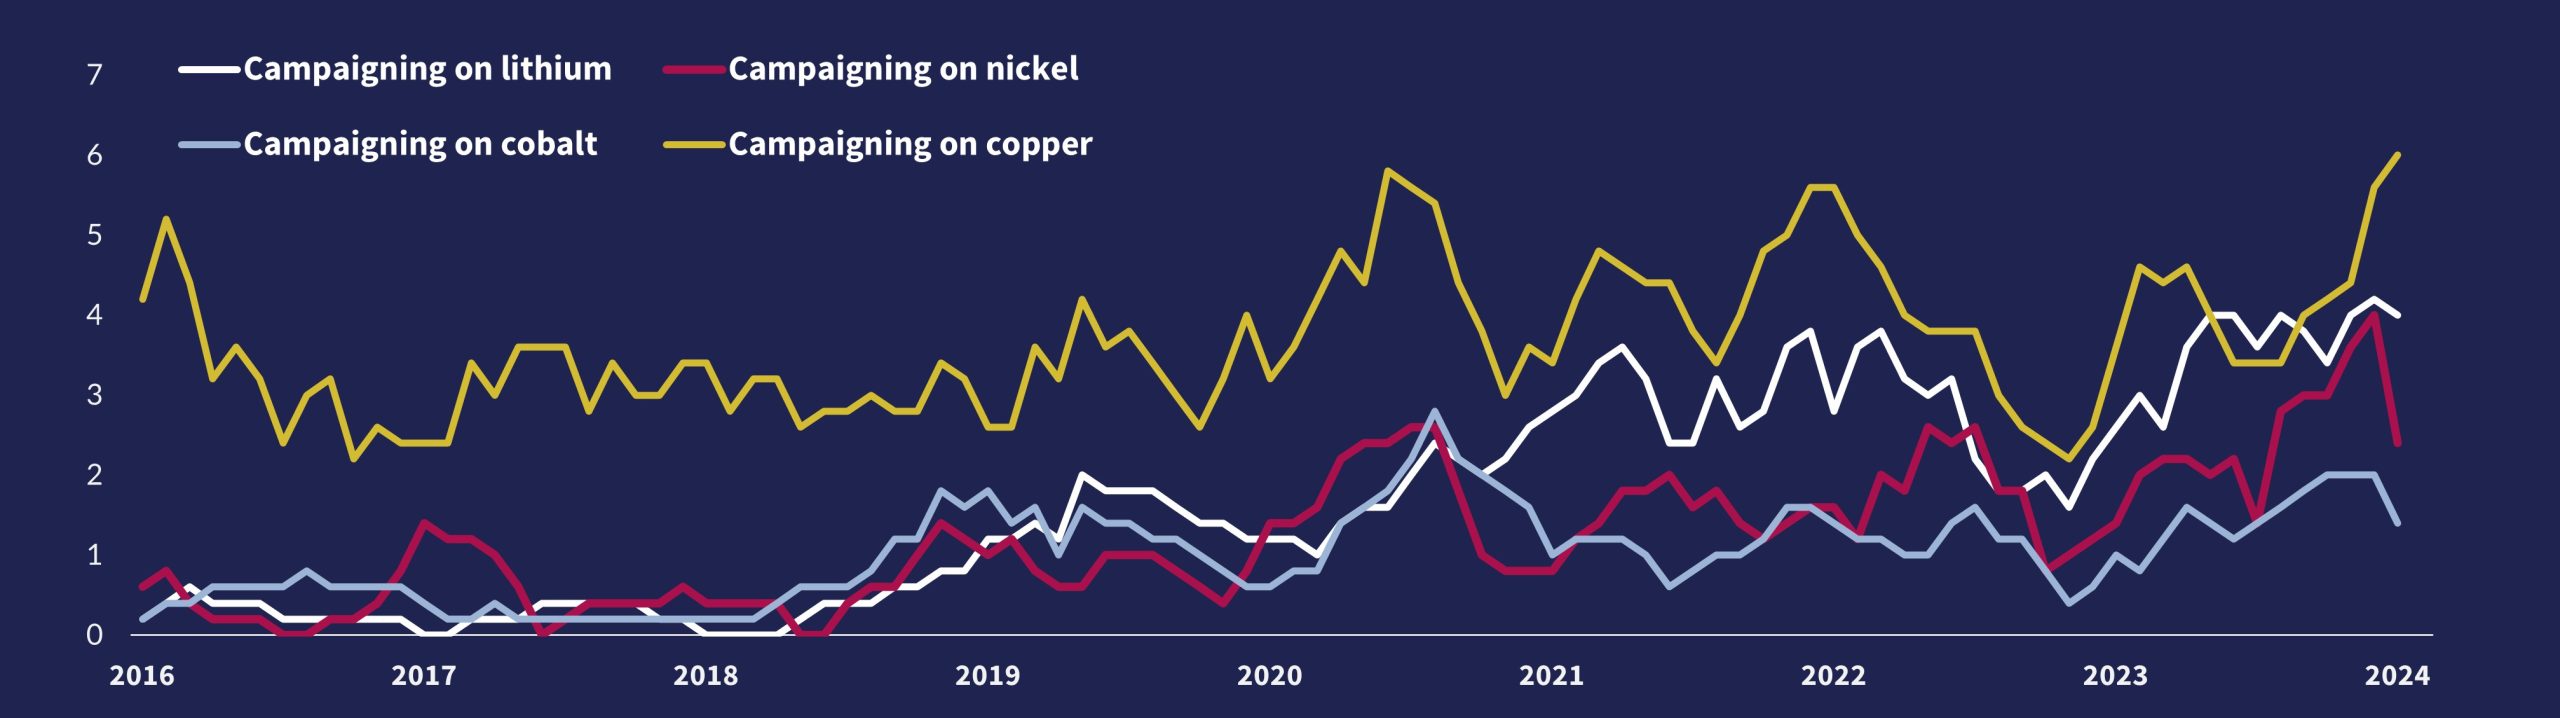 Graph showing campaigning patterns targeted at the mining sector for deep-sea mining of transition metals like copper, lithium, cobalt and nickel .